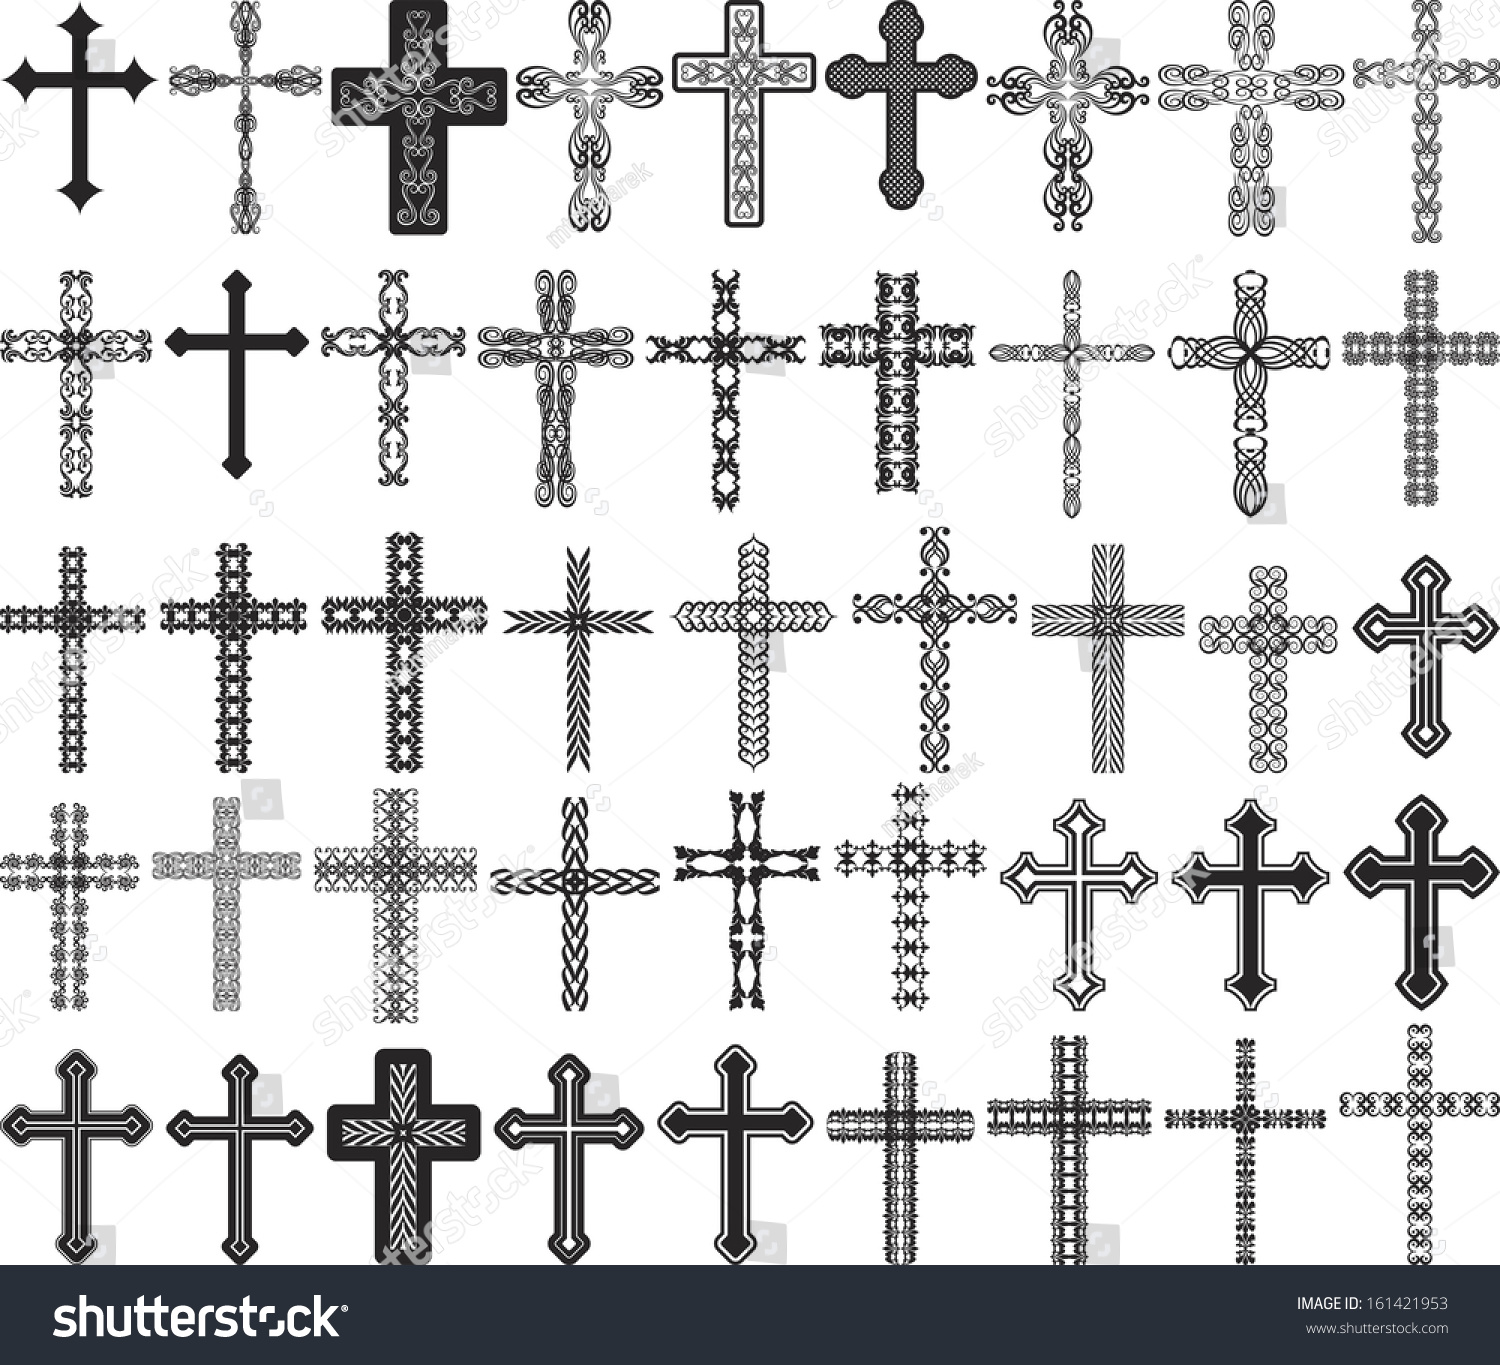 Clip Art Illustration Of Crosses With Ornaments - 161421953 : Shutterstock